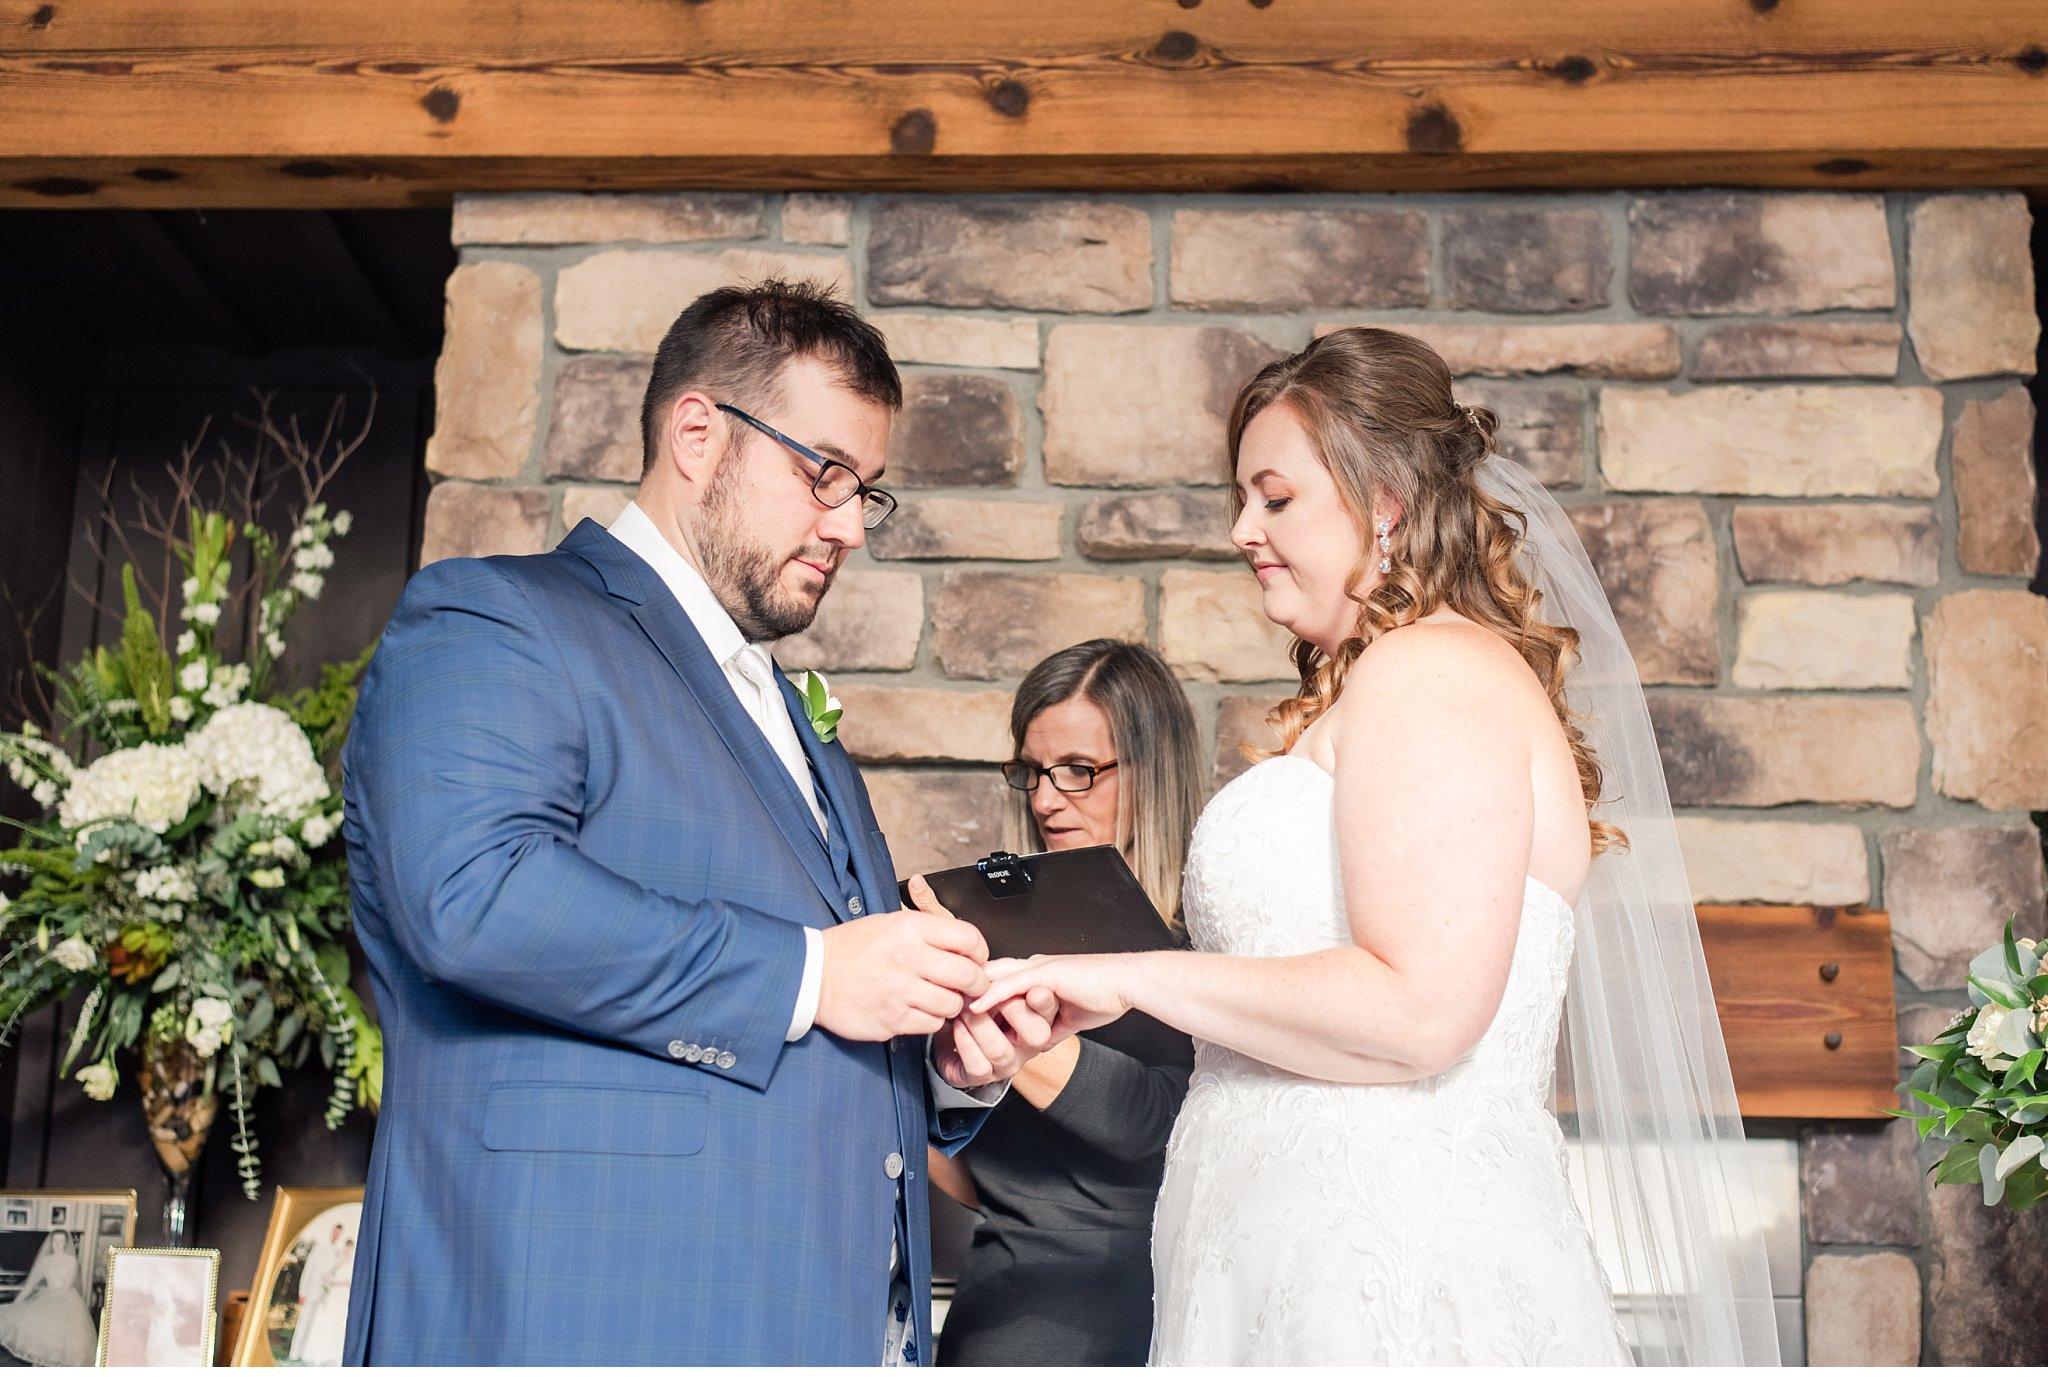 groom places ring on bride's finger during their wedding ceremony